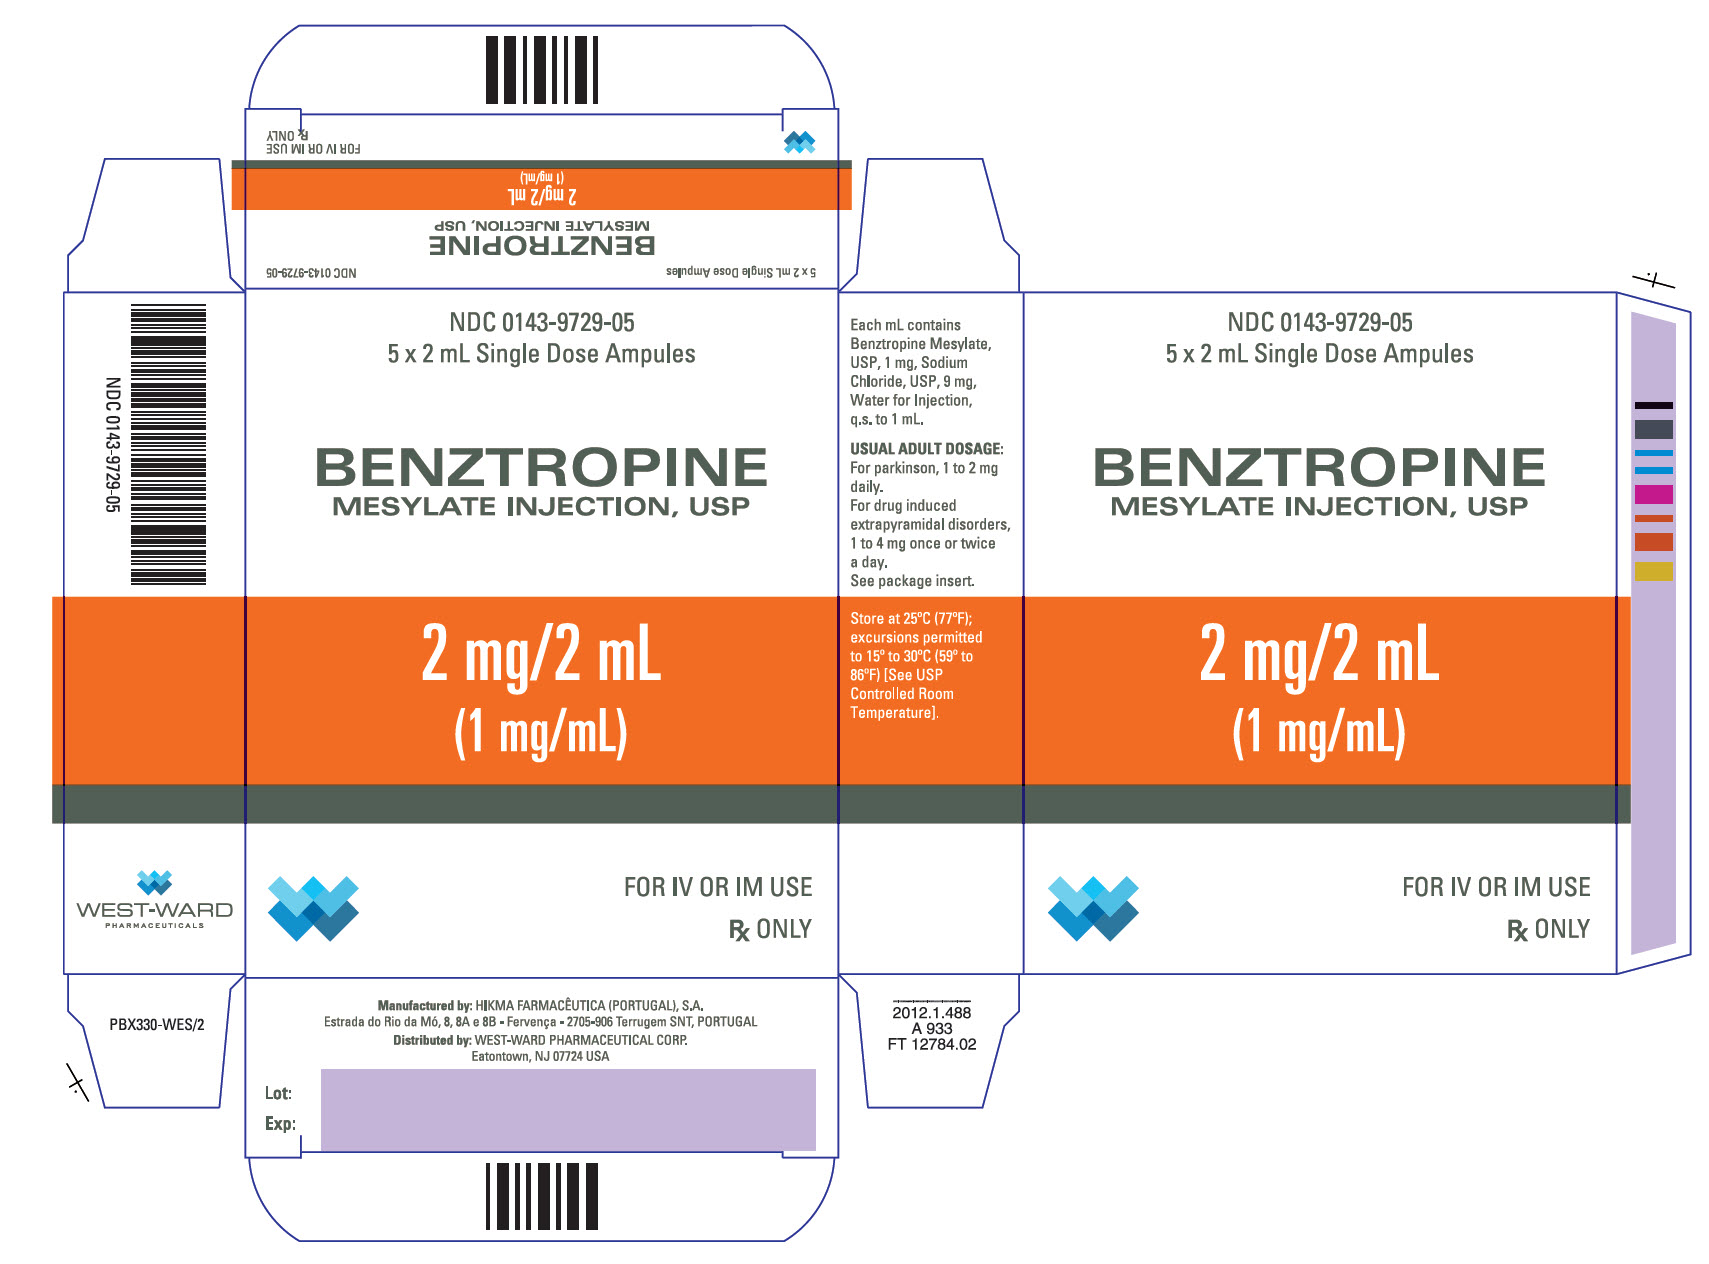 NDC: <a href=/NDC/0143-9729-05>0143-9729-05</a> BENZTROPINE MESYLATE INJECTION, USP 2 mg/2 mL (1 mg/mL) FOR IV OR IM USE Rx ONLY